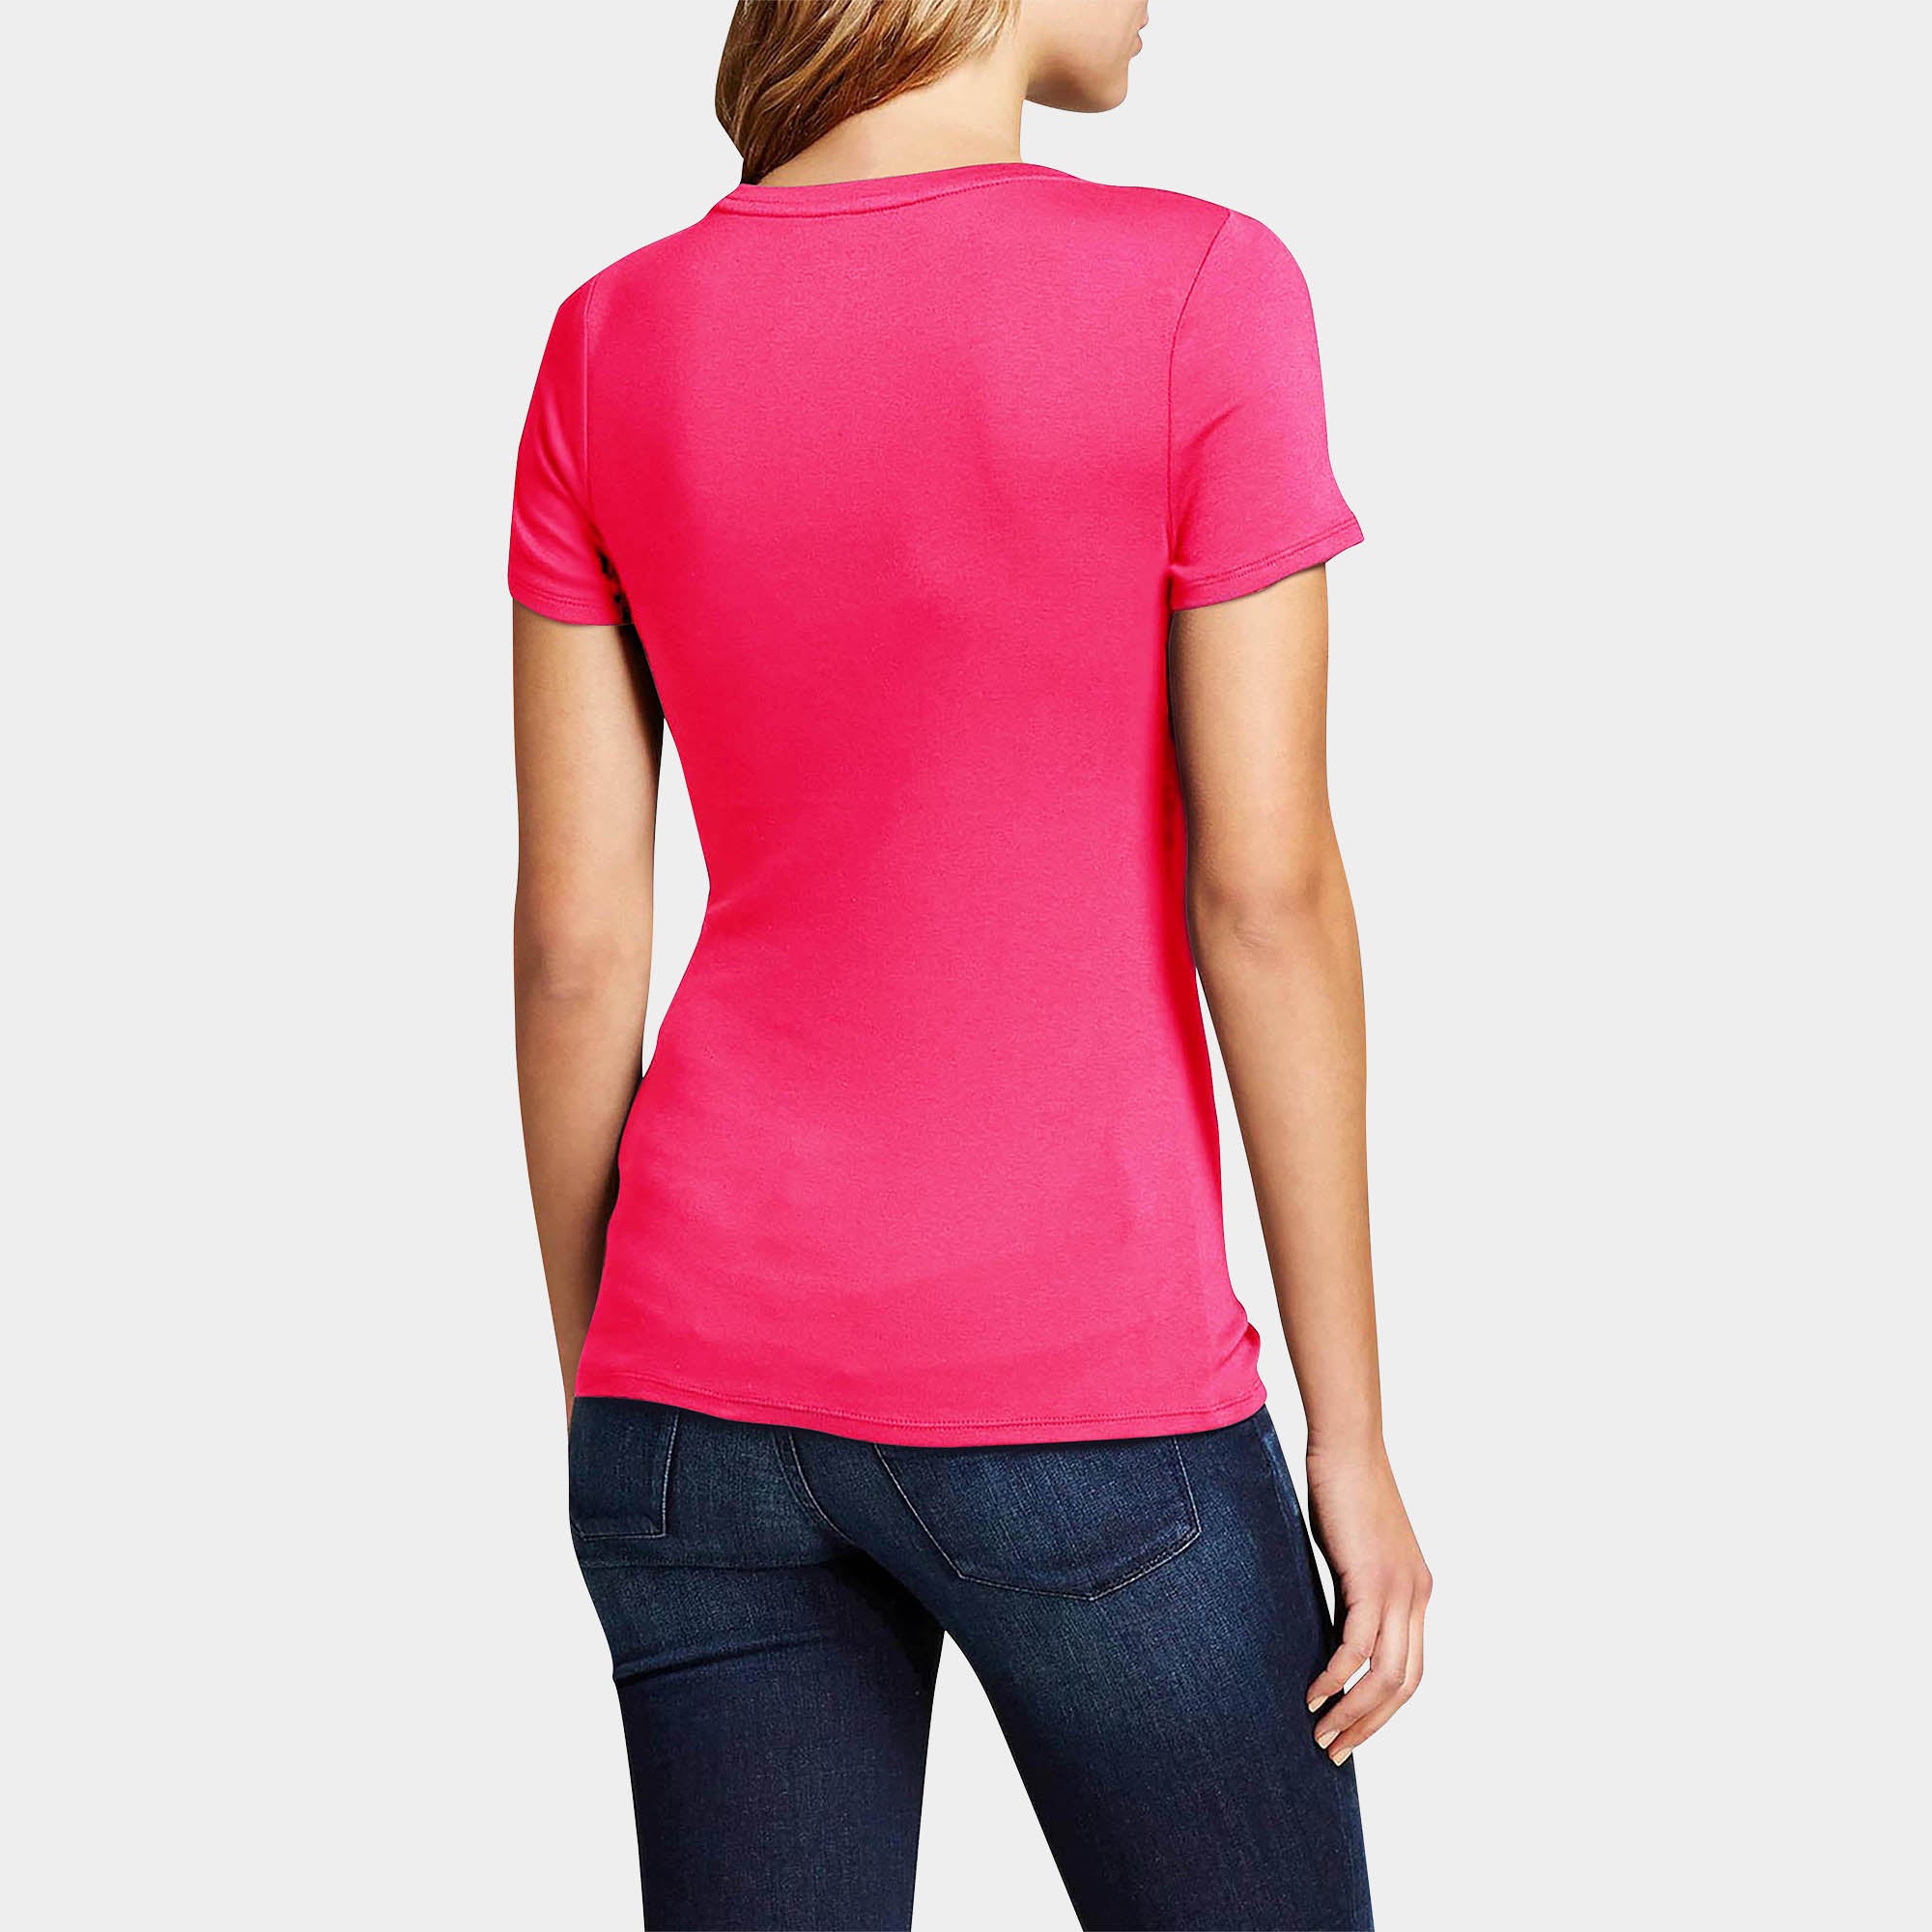 comfort tee_comfort color tees_comfort colors tee shirts_womens tee_tee shirts for women_best quality t shirts for women_Fuchsia